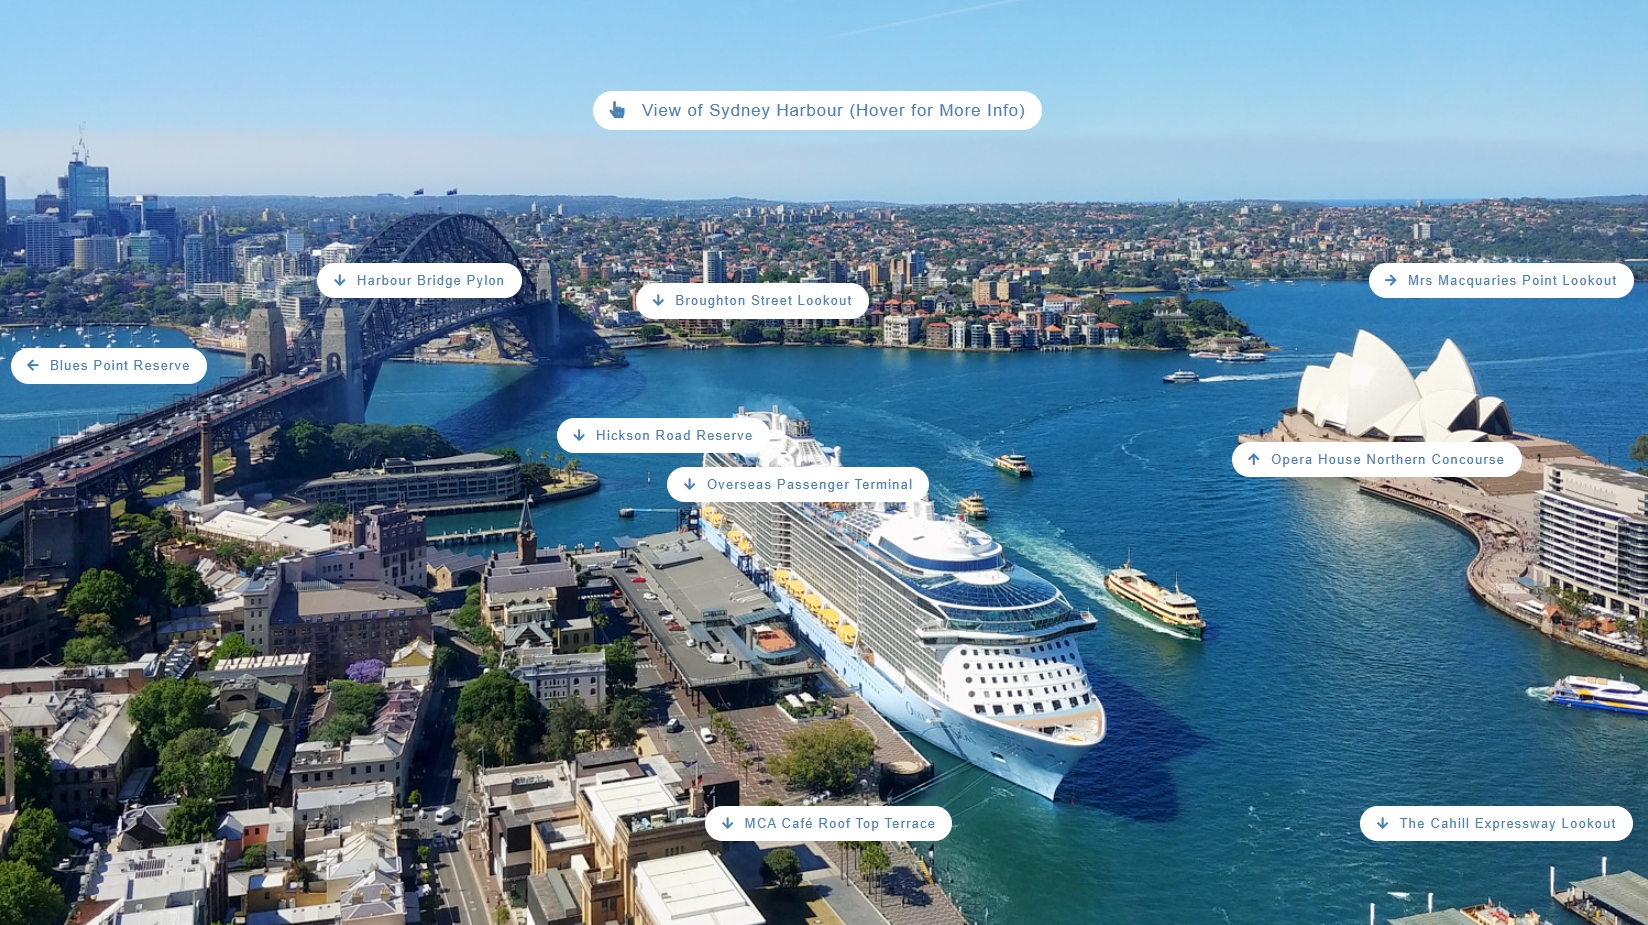 Map-of-Sydney-Harbour-for-locations-of-Instagrammable-photos-of-Sydney-Harbour-Bridge-Circular-Quay-Cruise-Ships-Sydney-Opera-House.-By-orlandosydney.com